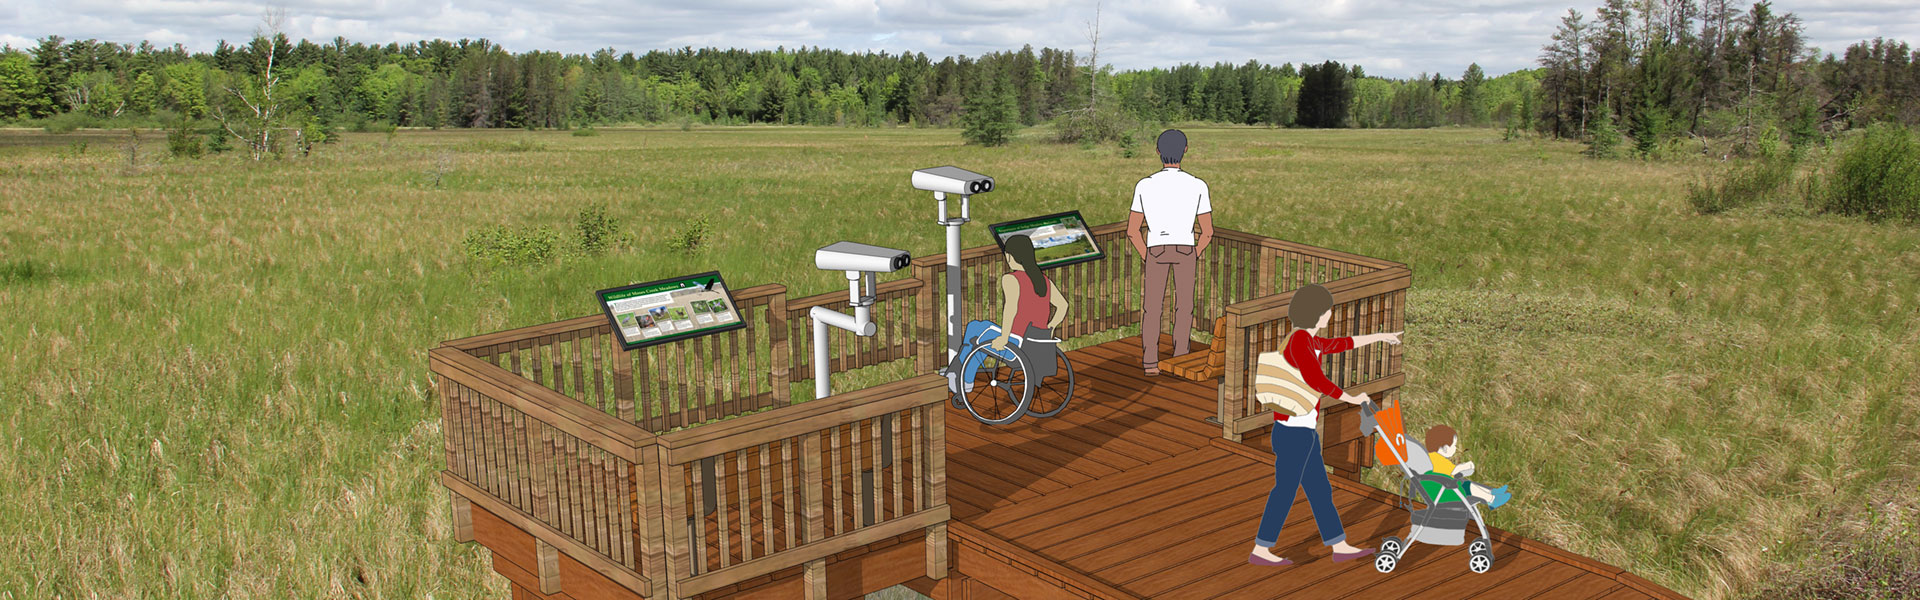 Moses Creek Meadows proposed viewing deck